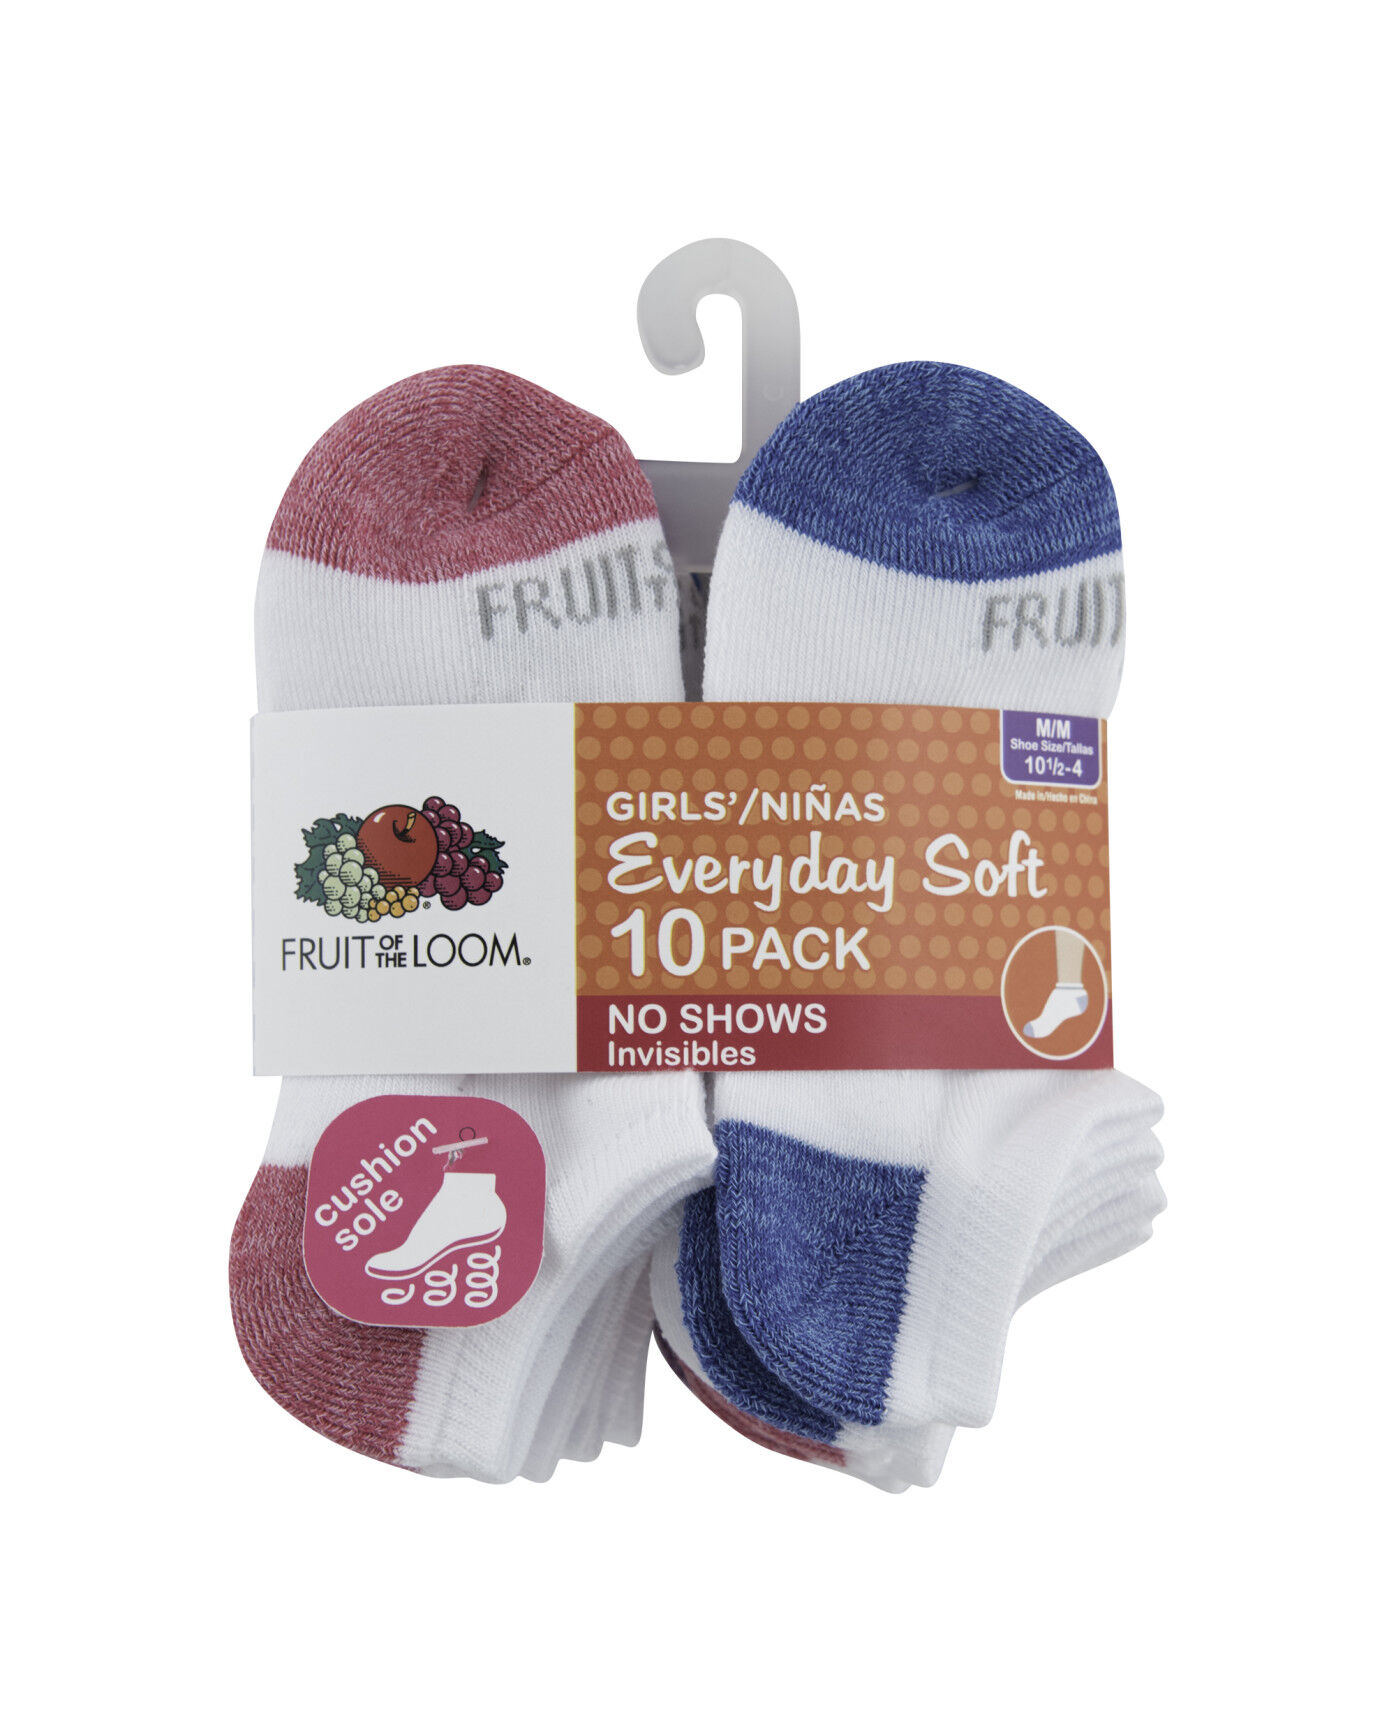 Fruit of the Loom Girl's 10 Pack Everyday Soft No Show Socks Size 6-10.5 Small 